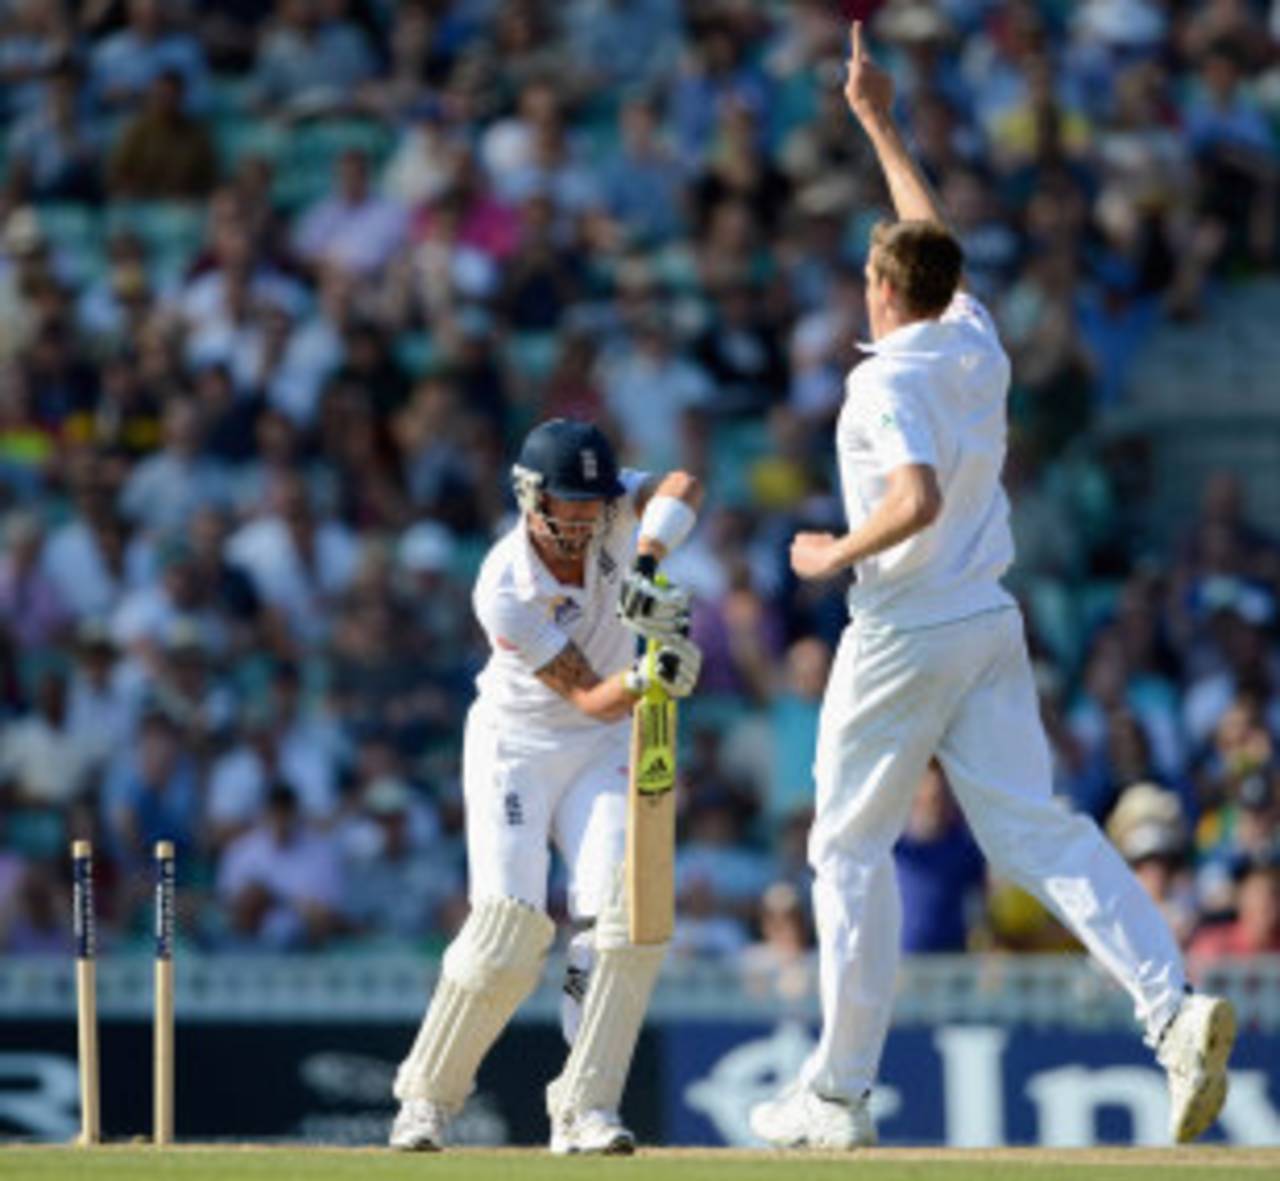 Not in picture: the small dog Morkel flung at Pietersen's stumps to dislodge them&nbsp;&nbsp;&bull;&nbsp;&nbsp;Getty Images